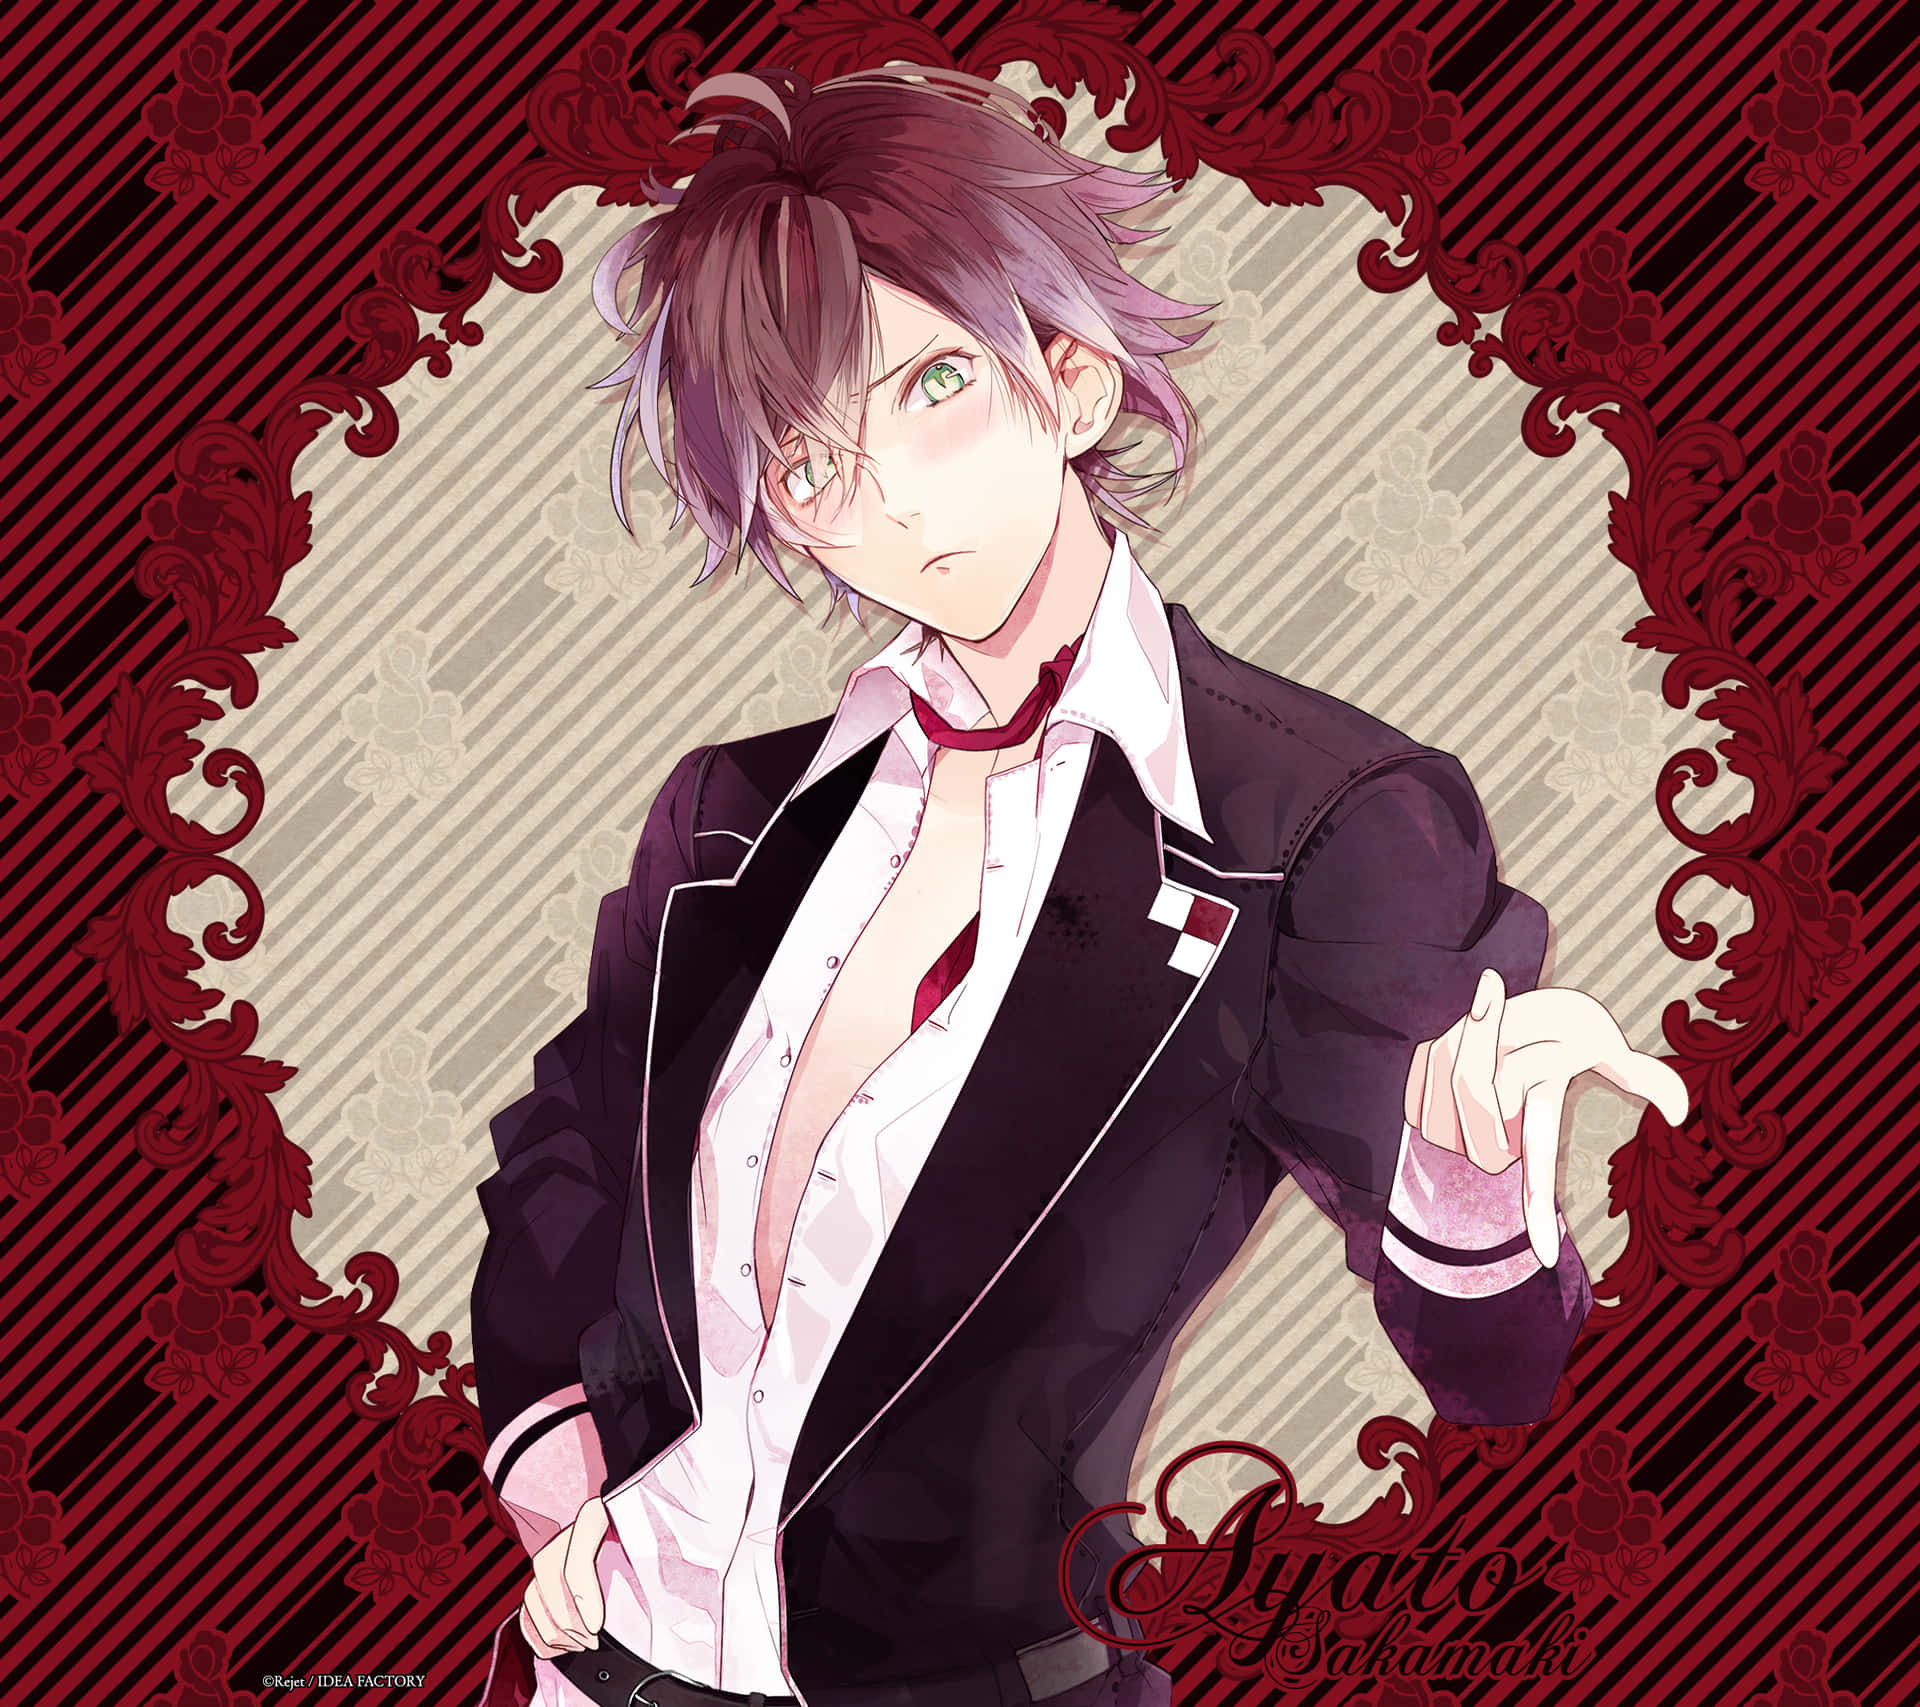 "Embrace the darkness with Diabolik Lovers"